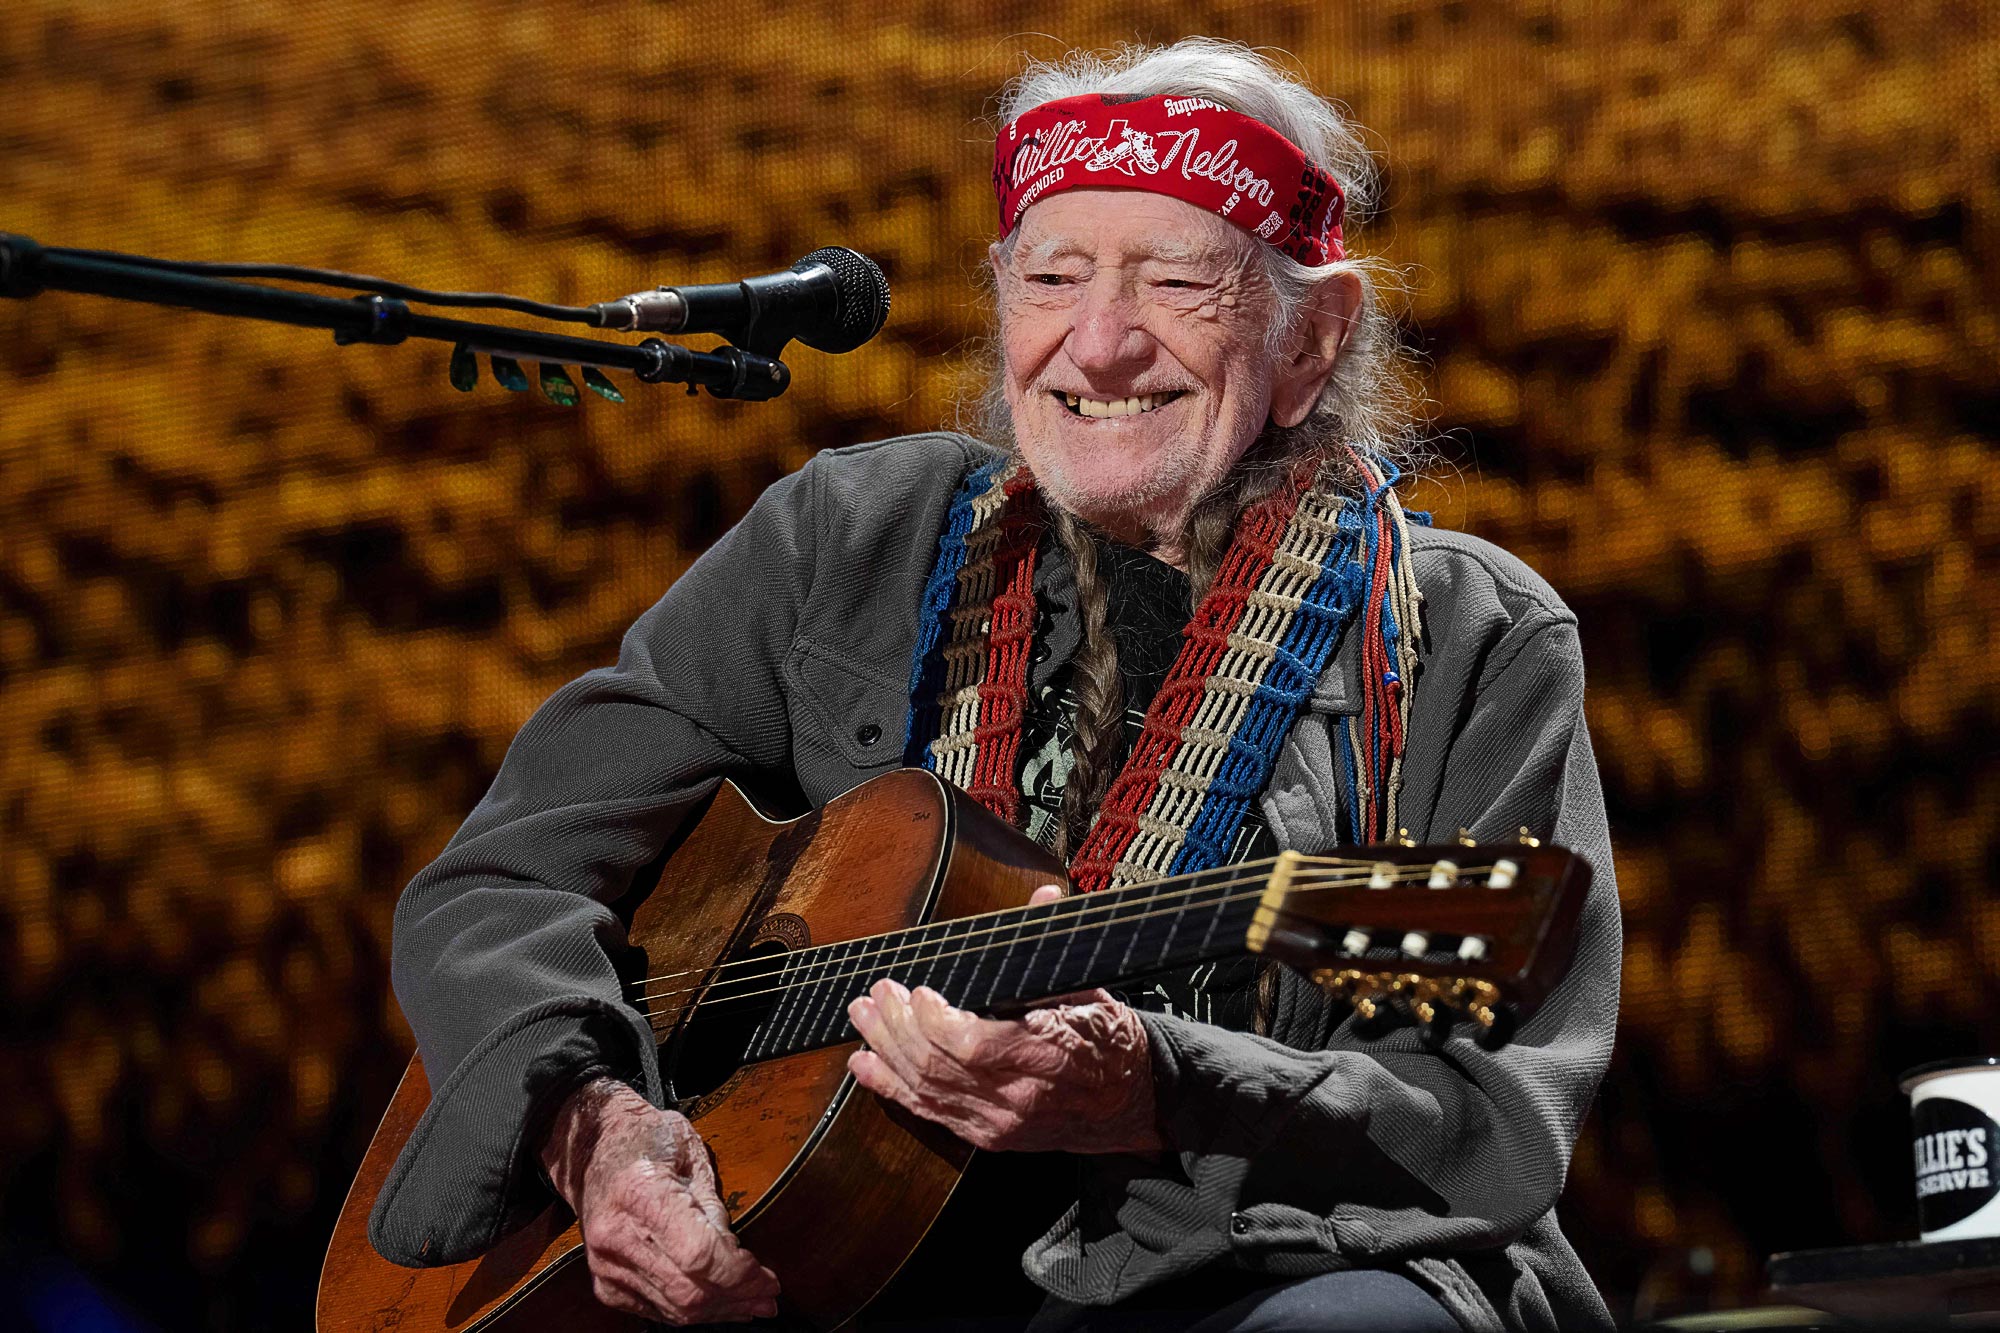 Willie Nelson Receives Standing Ovation After Facing Health Scare